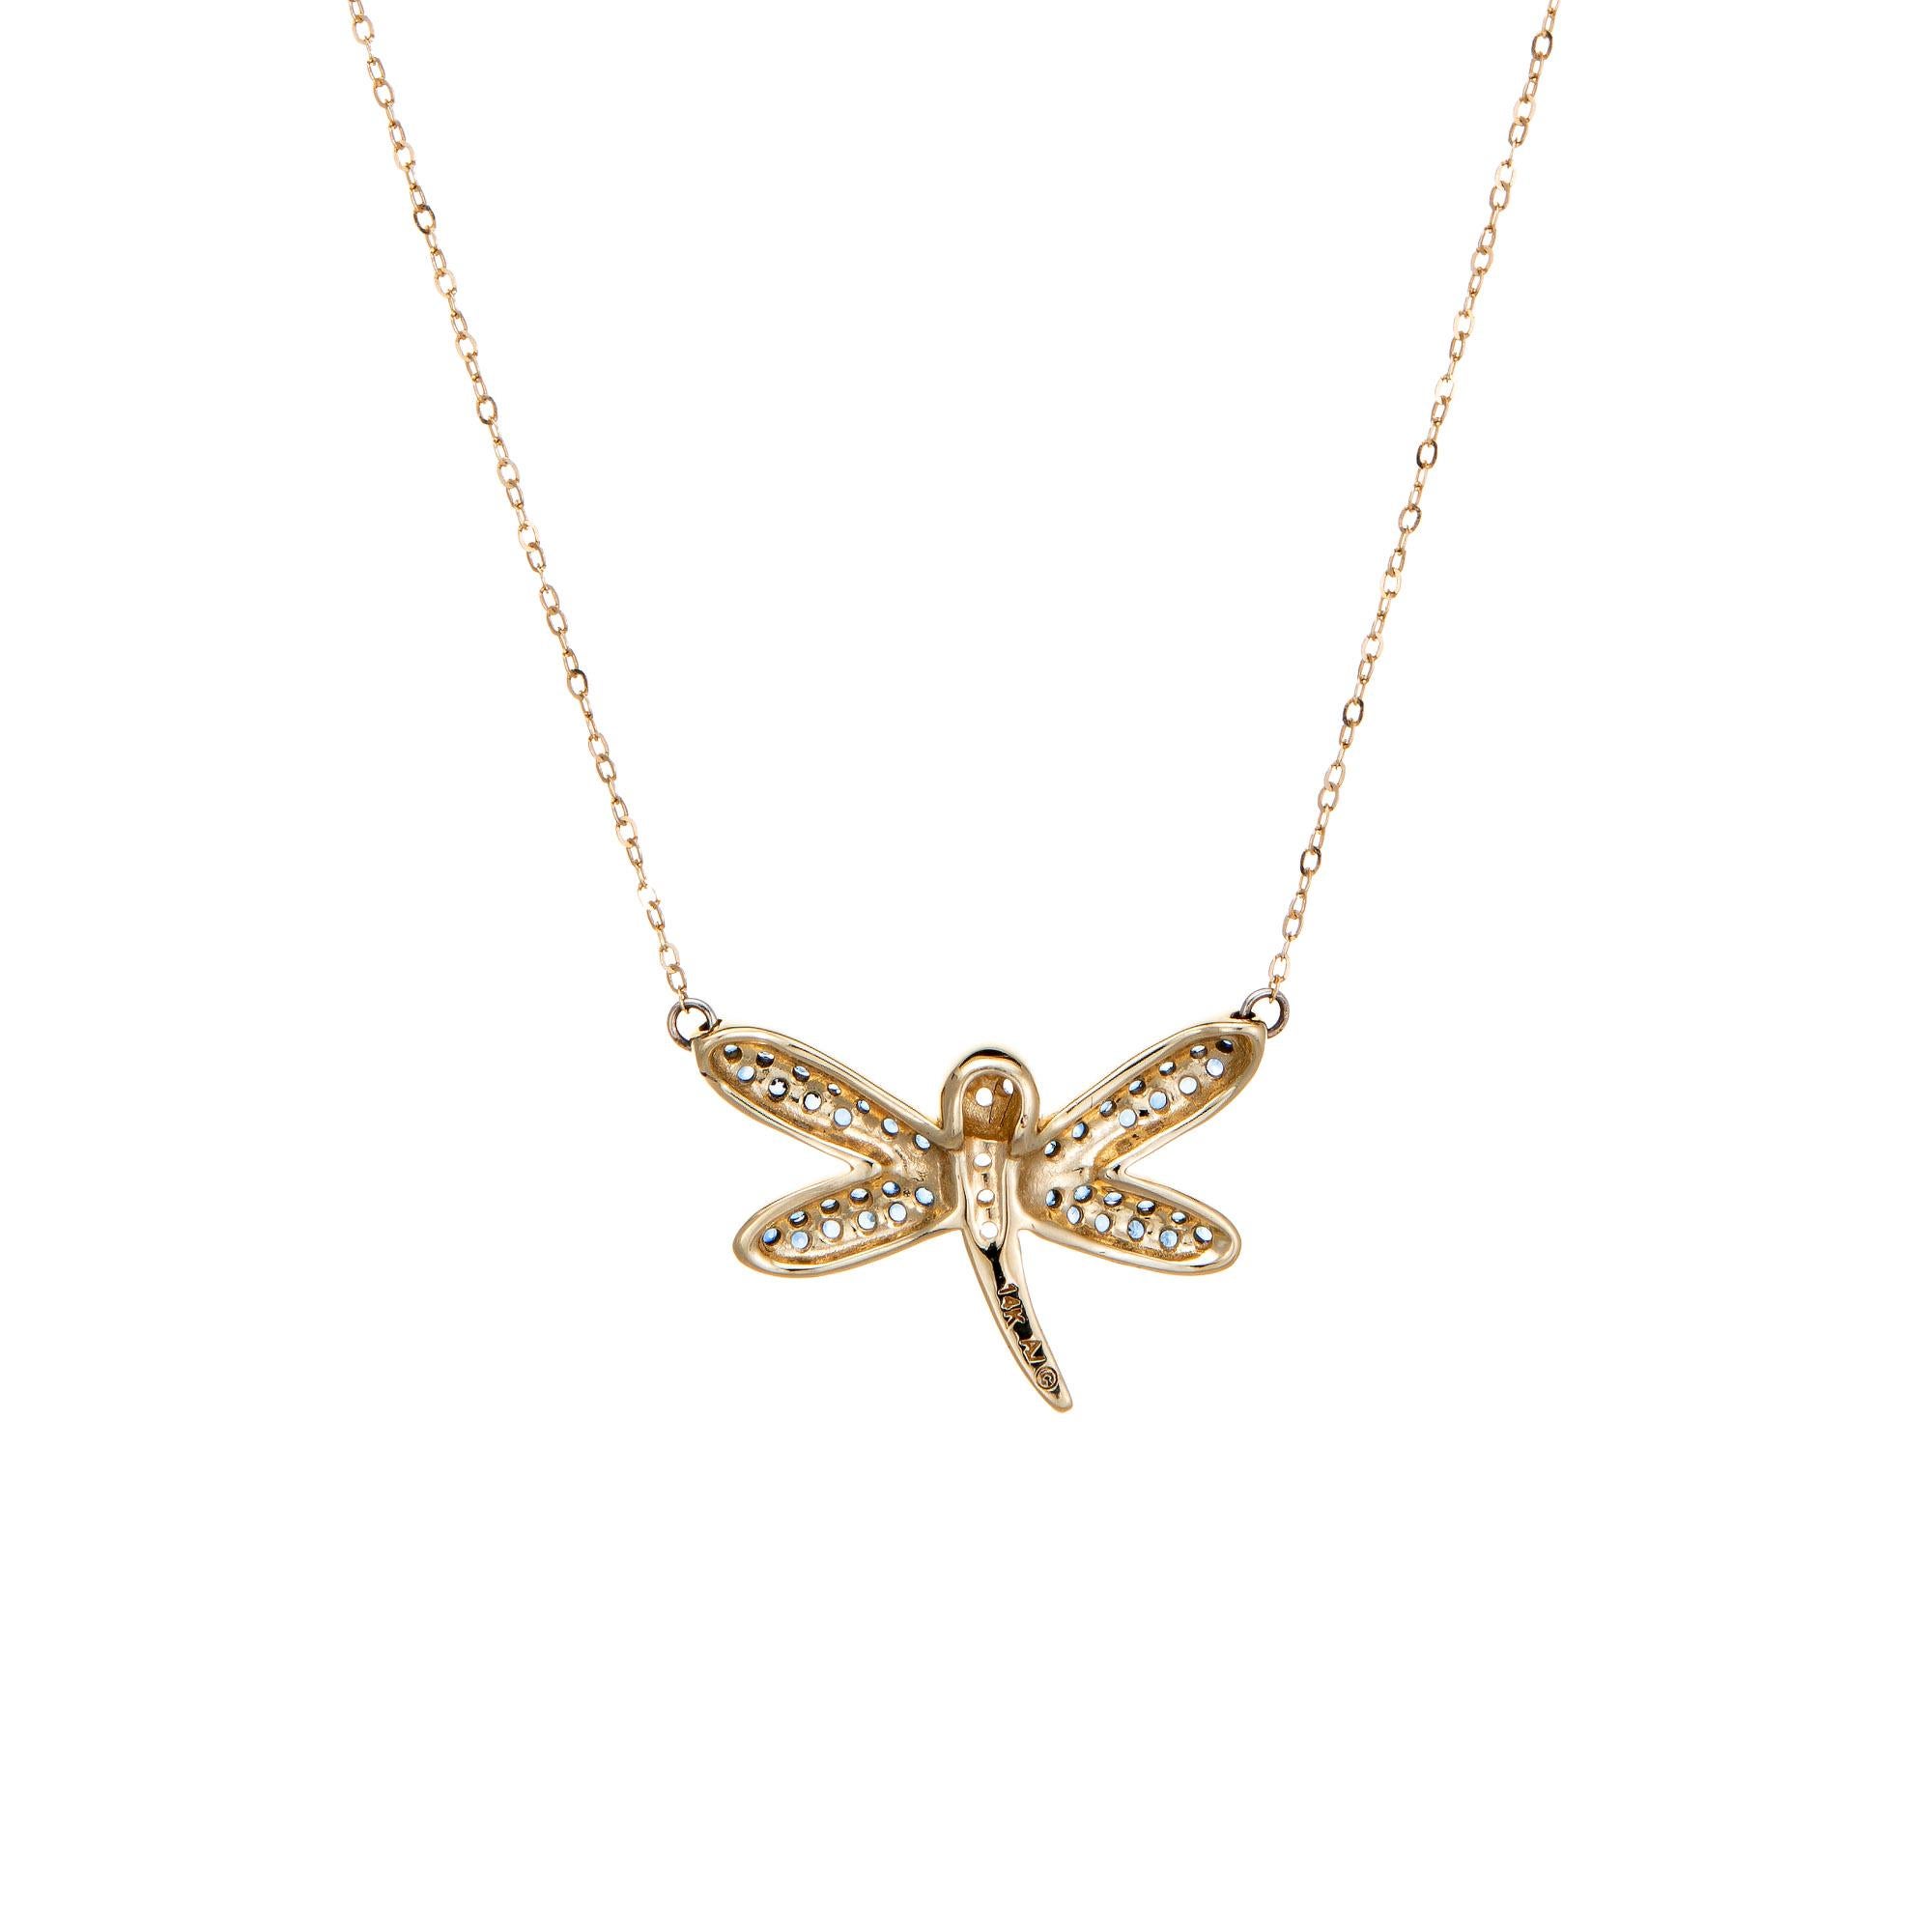 Stylish and finely detailed dragonfly sapphire & diamond necklace crafted in 14 karat yellow gold.

Diamonds total an estimated 0.10 carats (estimated at G-H color and VS2-SI1 clarity). The sapphires total an estimated 0.25 carats. 

The dragonfly